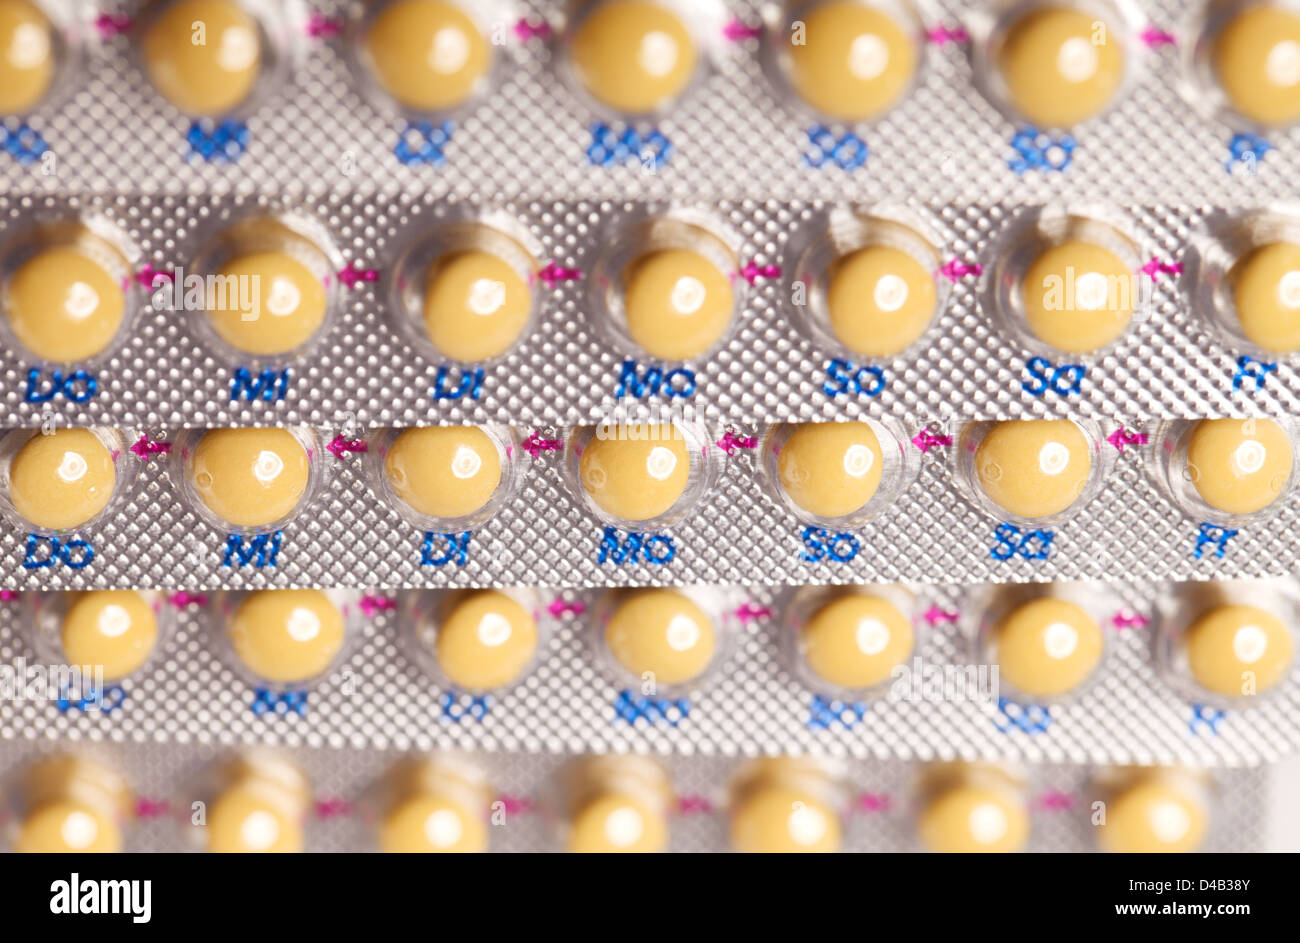 Contraceptive Pill. tablets (Birth Control Pills) background Stock Photo